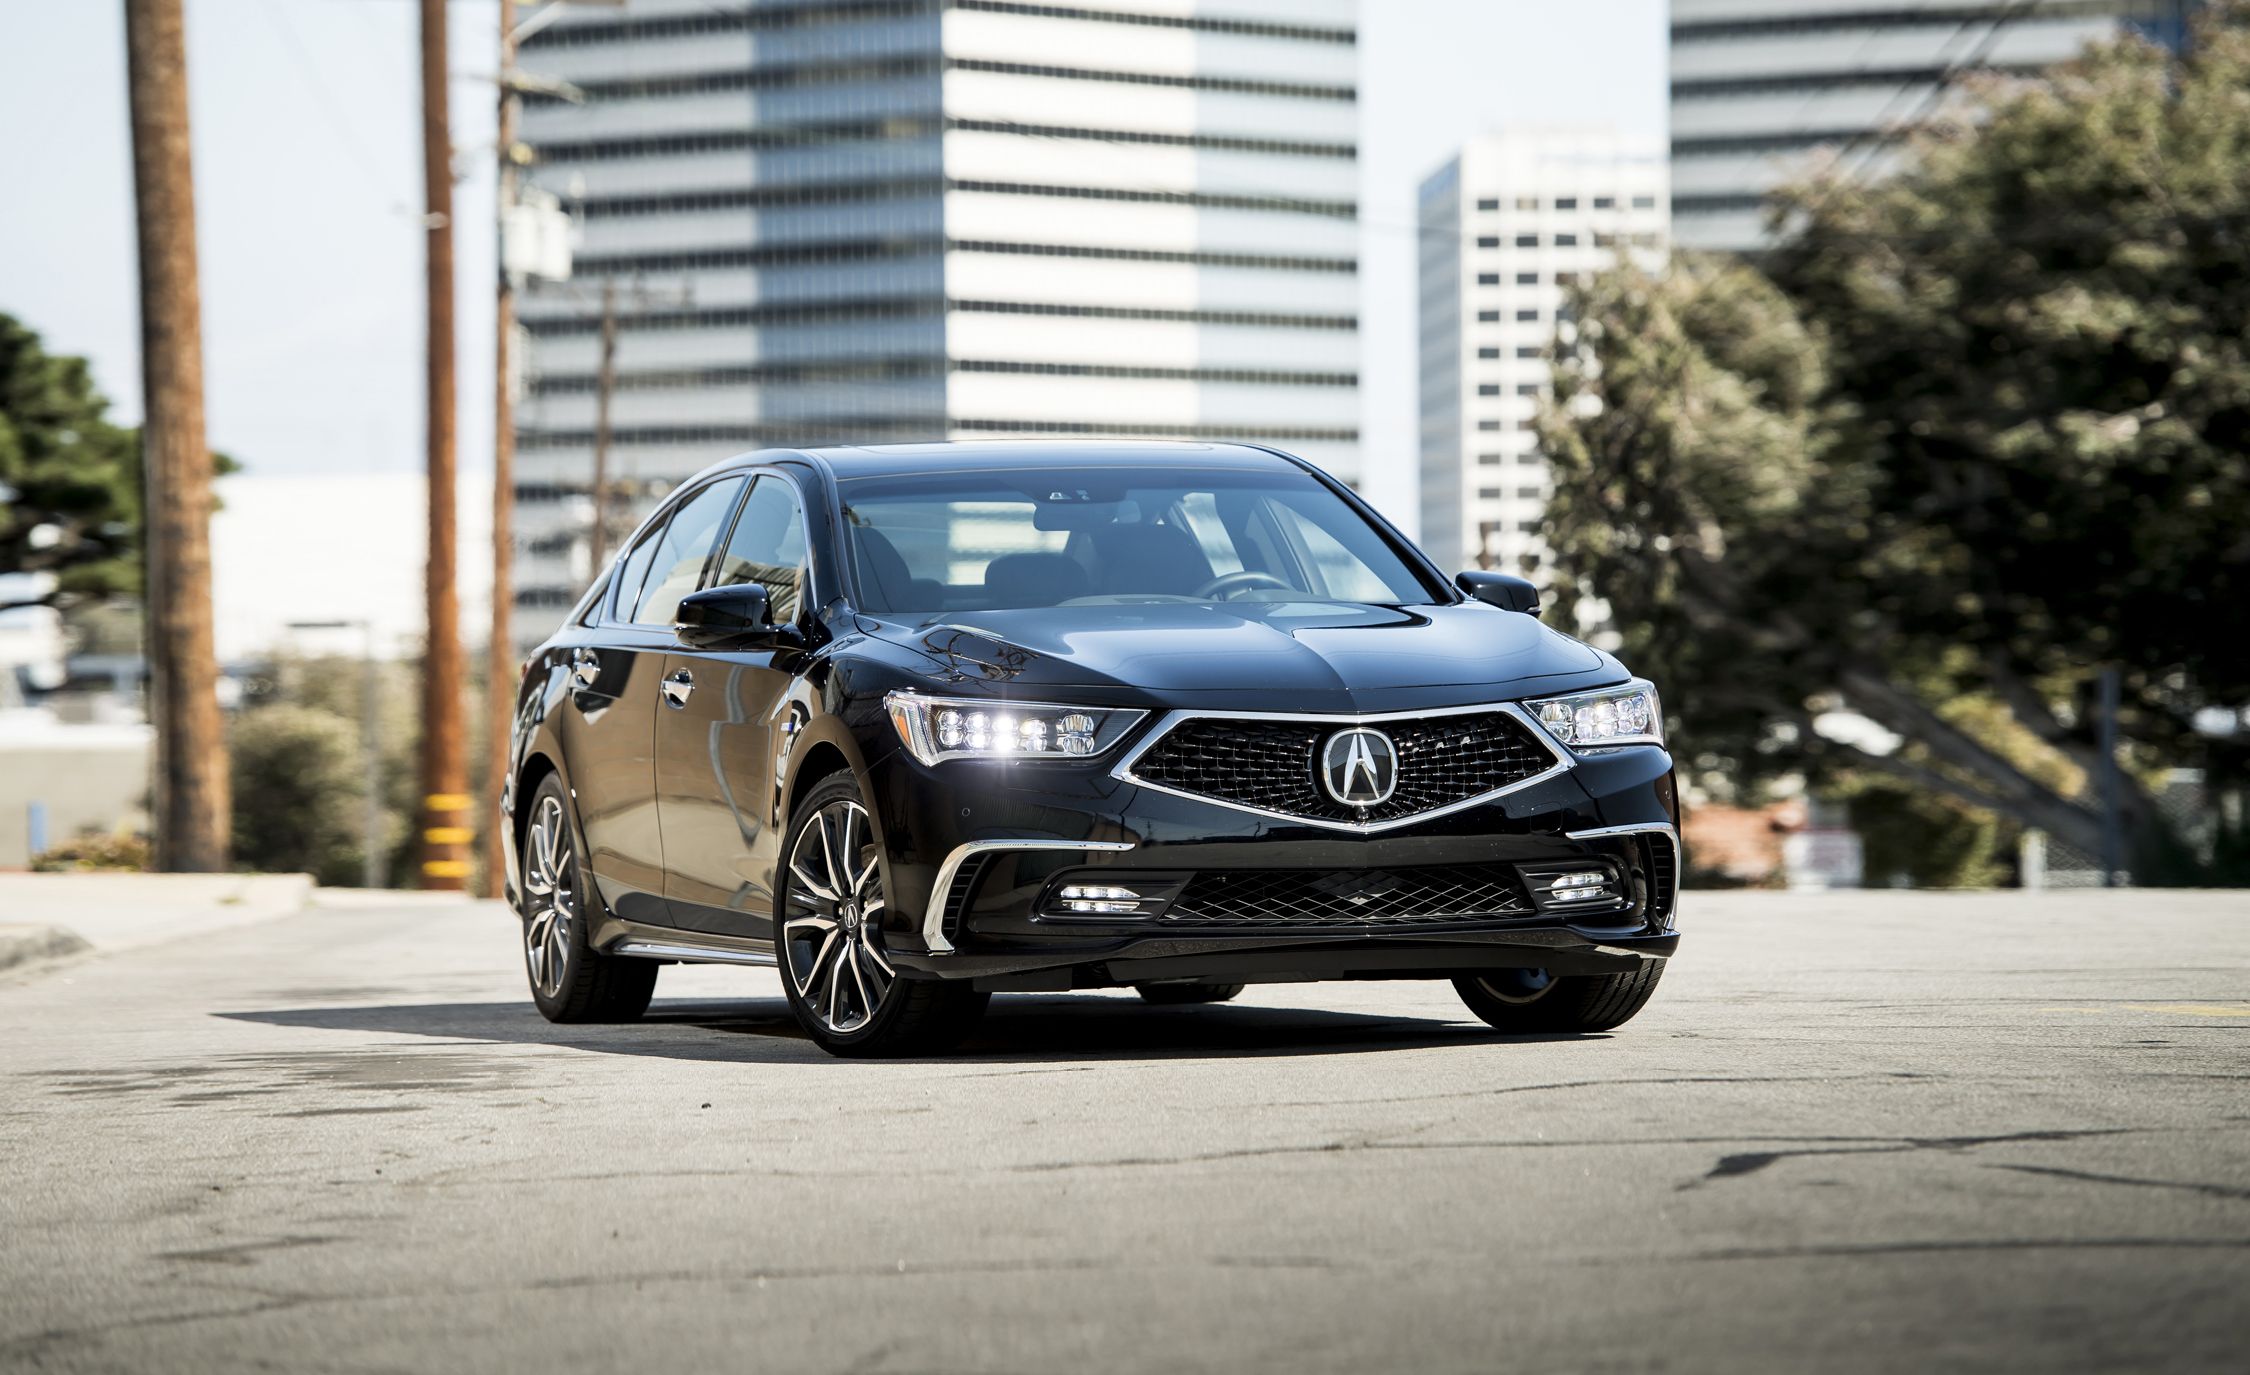 2018 Acura RLX Sport Hybrid SH-AWD Test | Review | Car and Driver